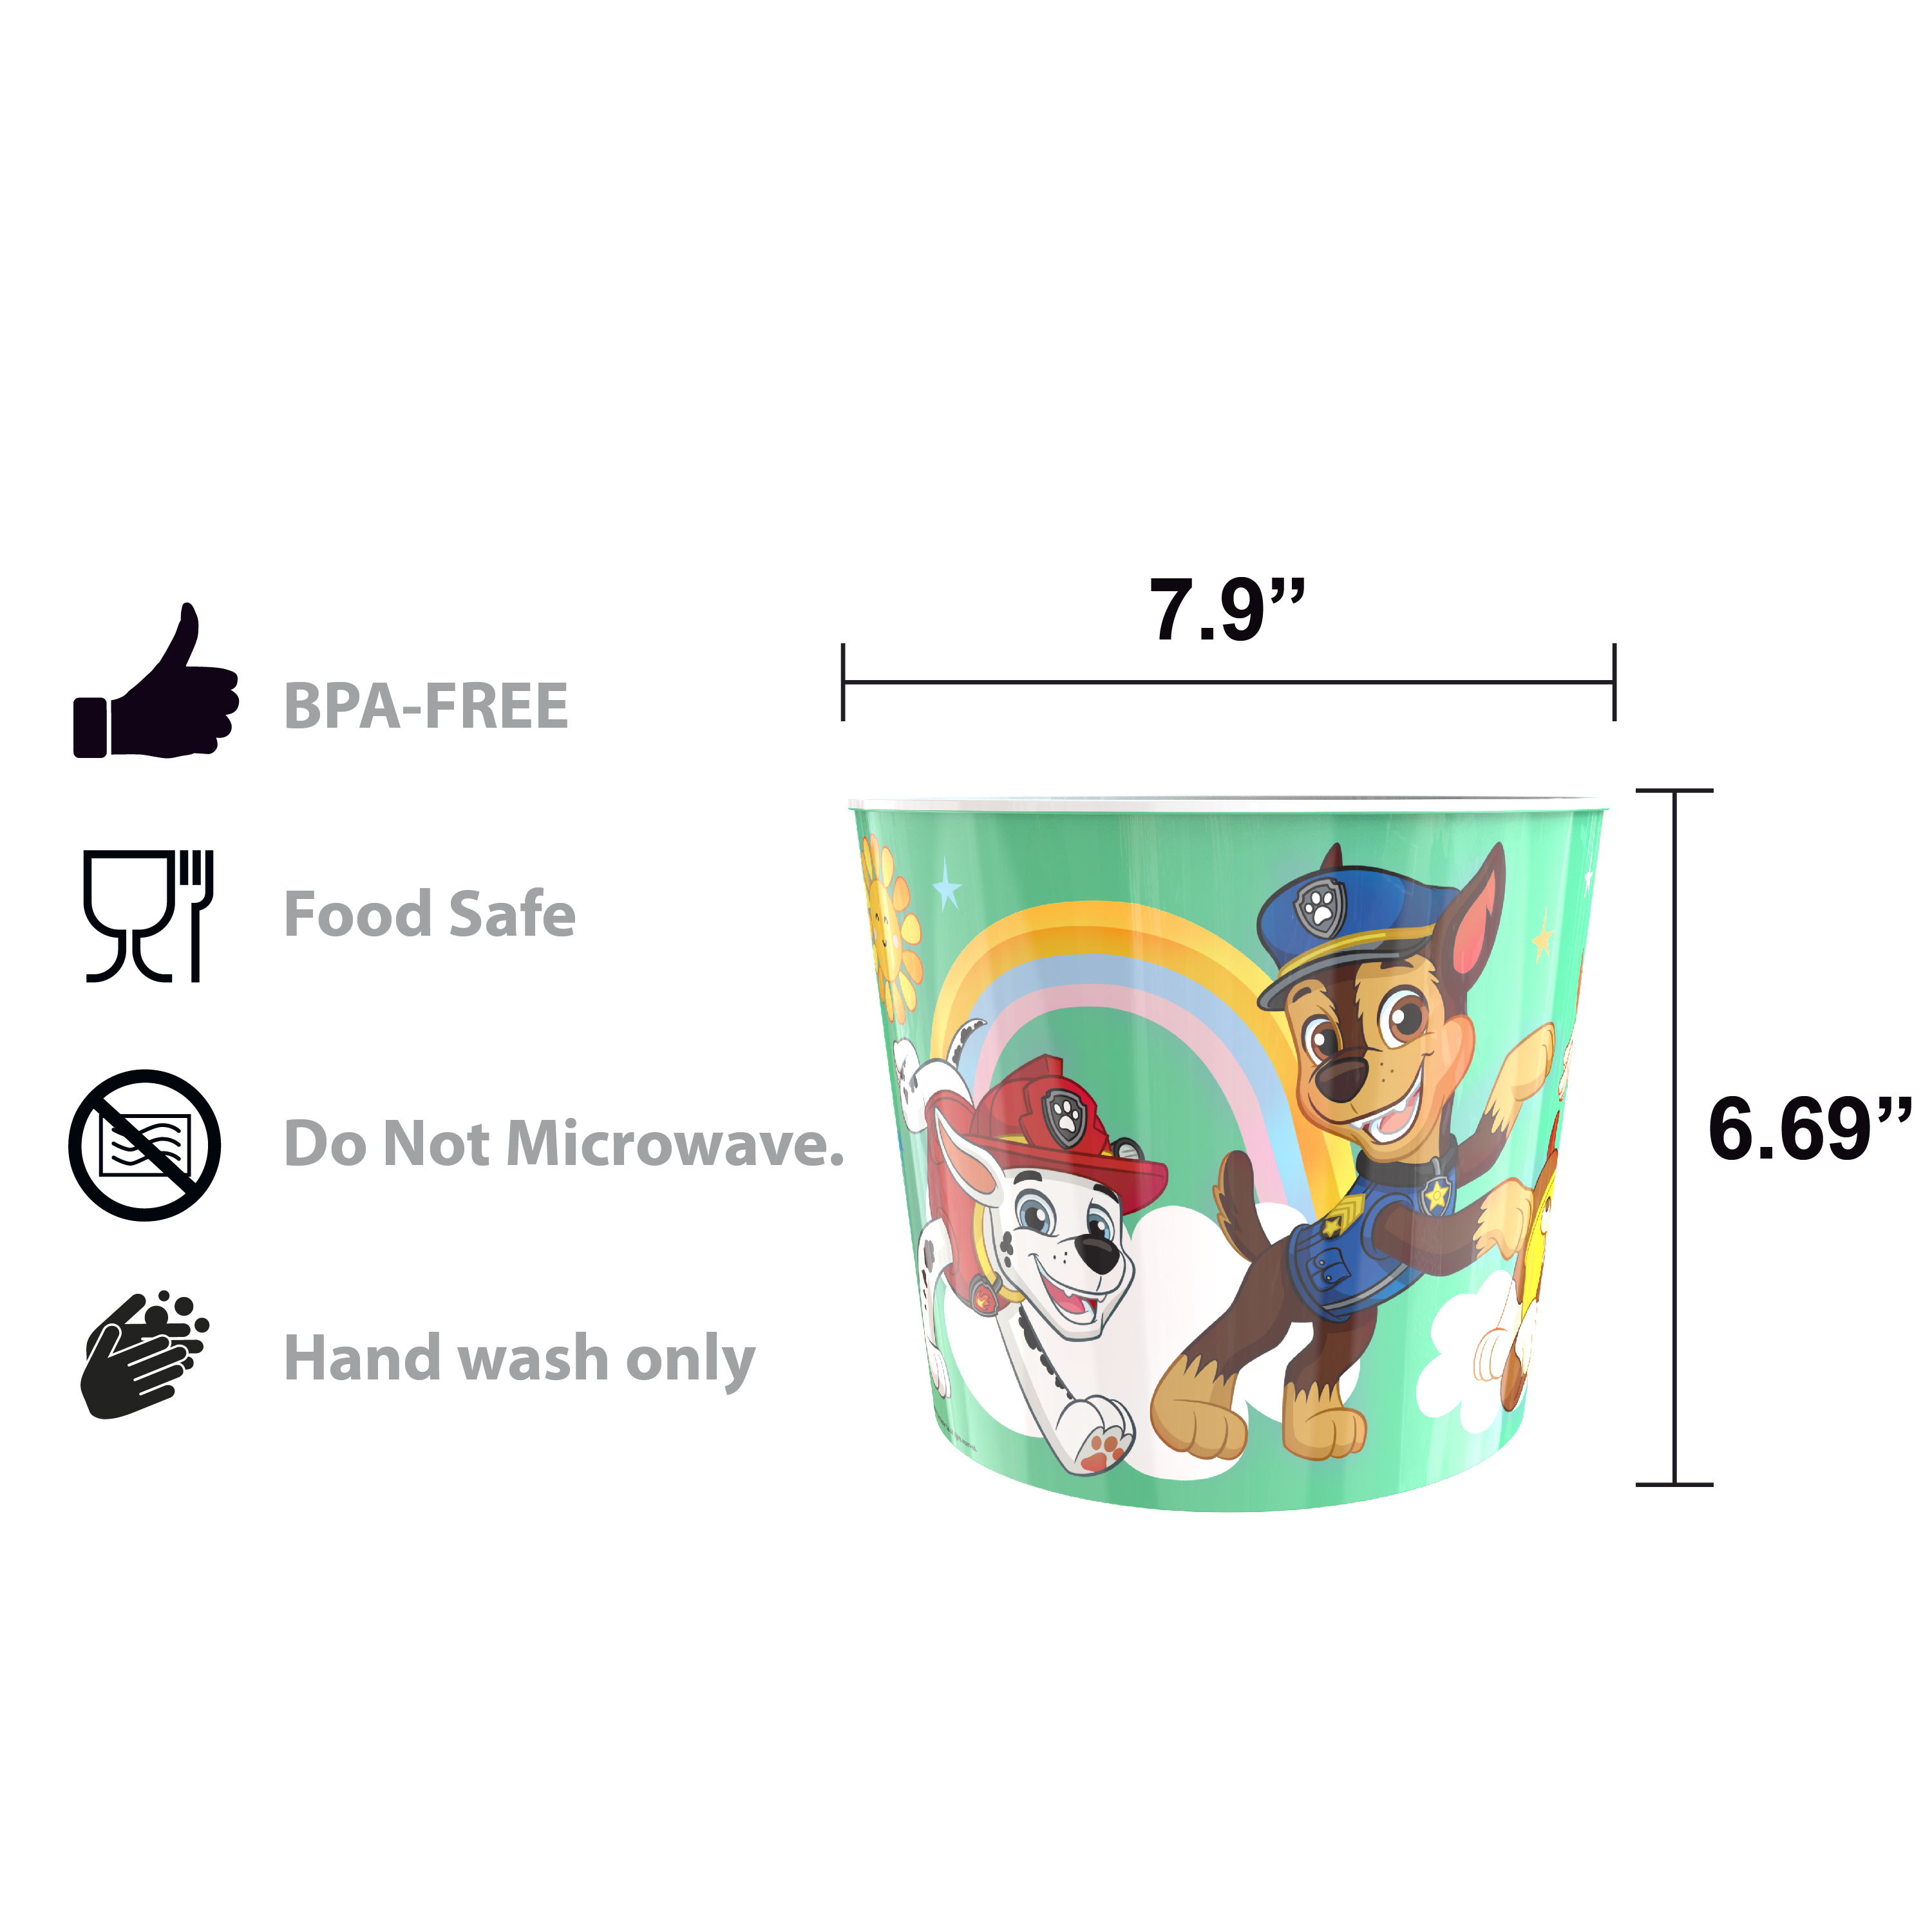 Paw Patrol Plastic Popcorn Container and Bowls, Chase, Marshall and Friends, 5-piece set slideshow image 10